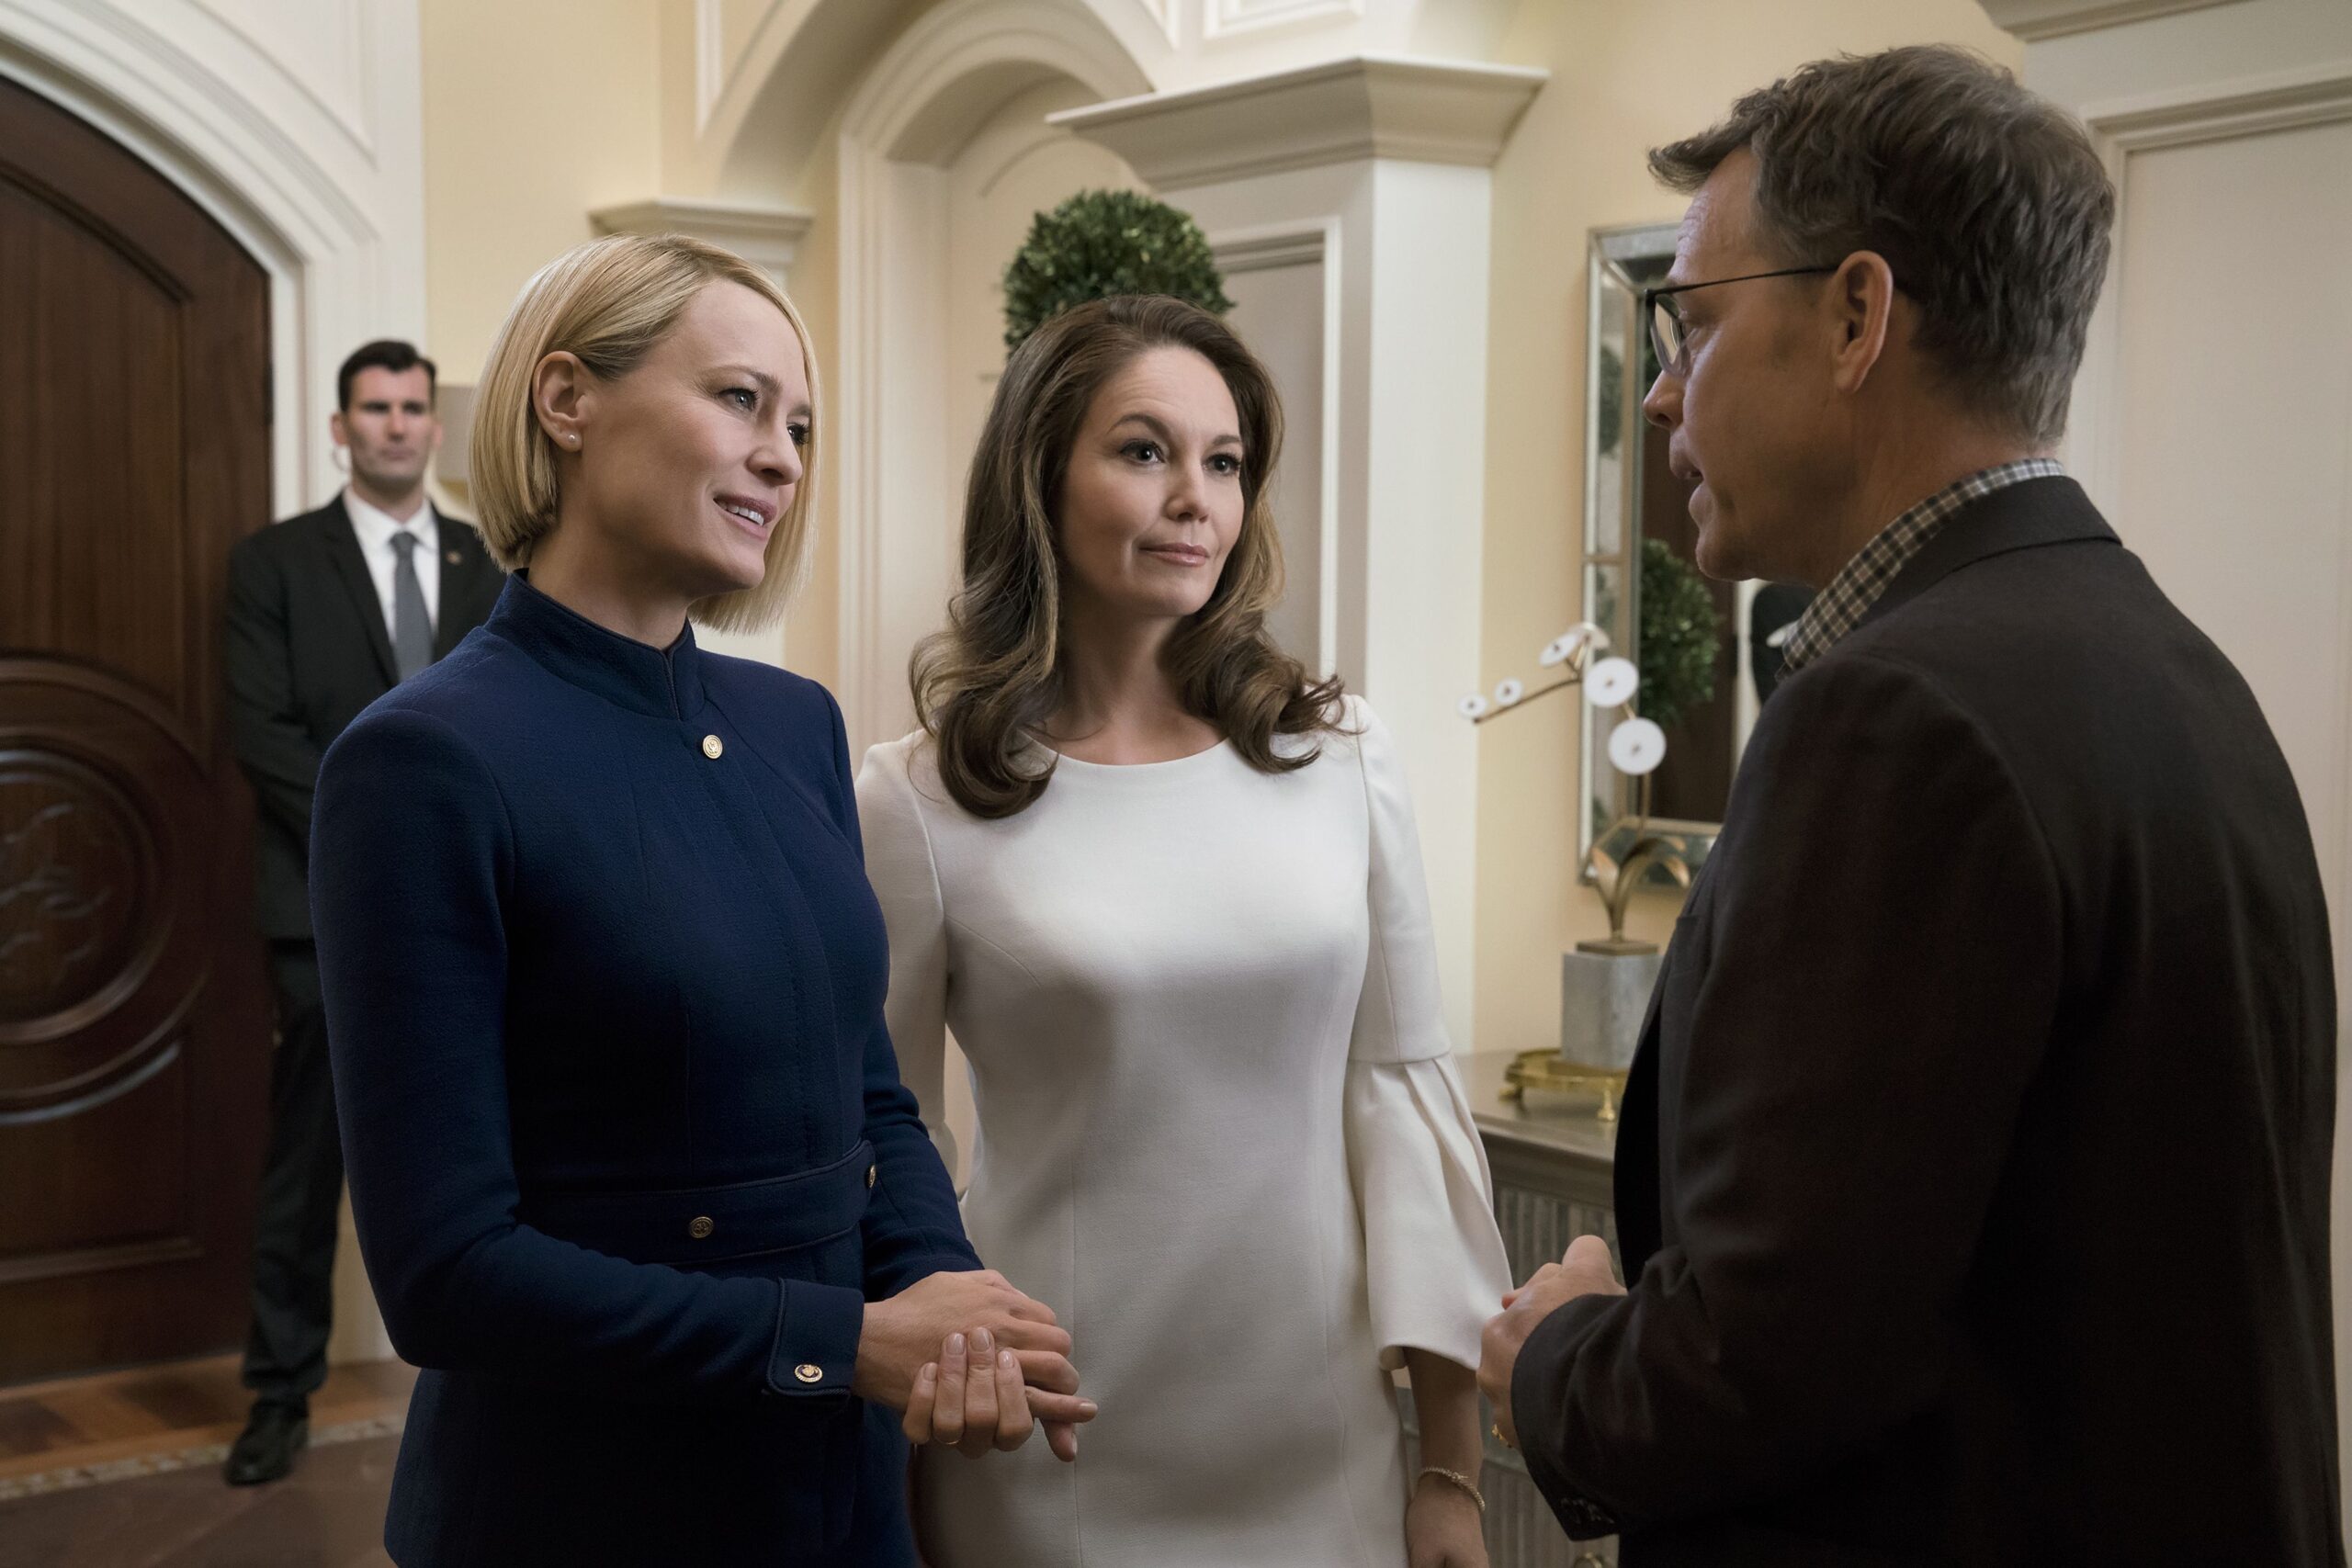 1535365361 house of cards season 6 exclusive photo claire underwood robin wright greg kinnear scaled